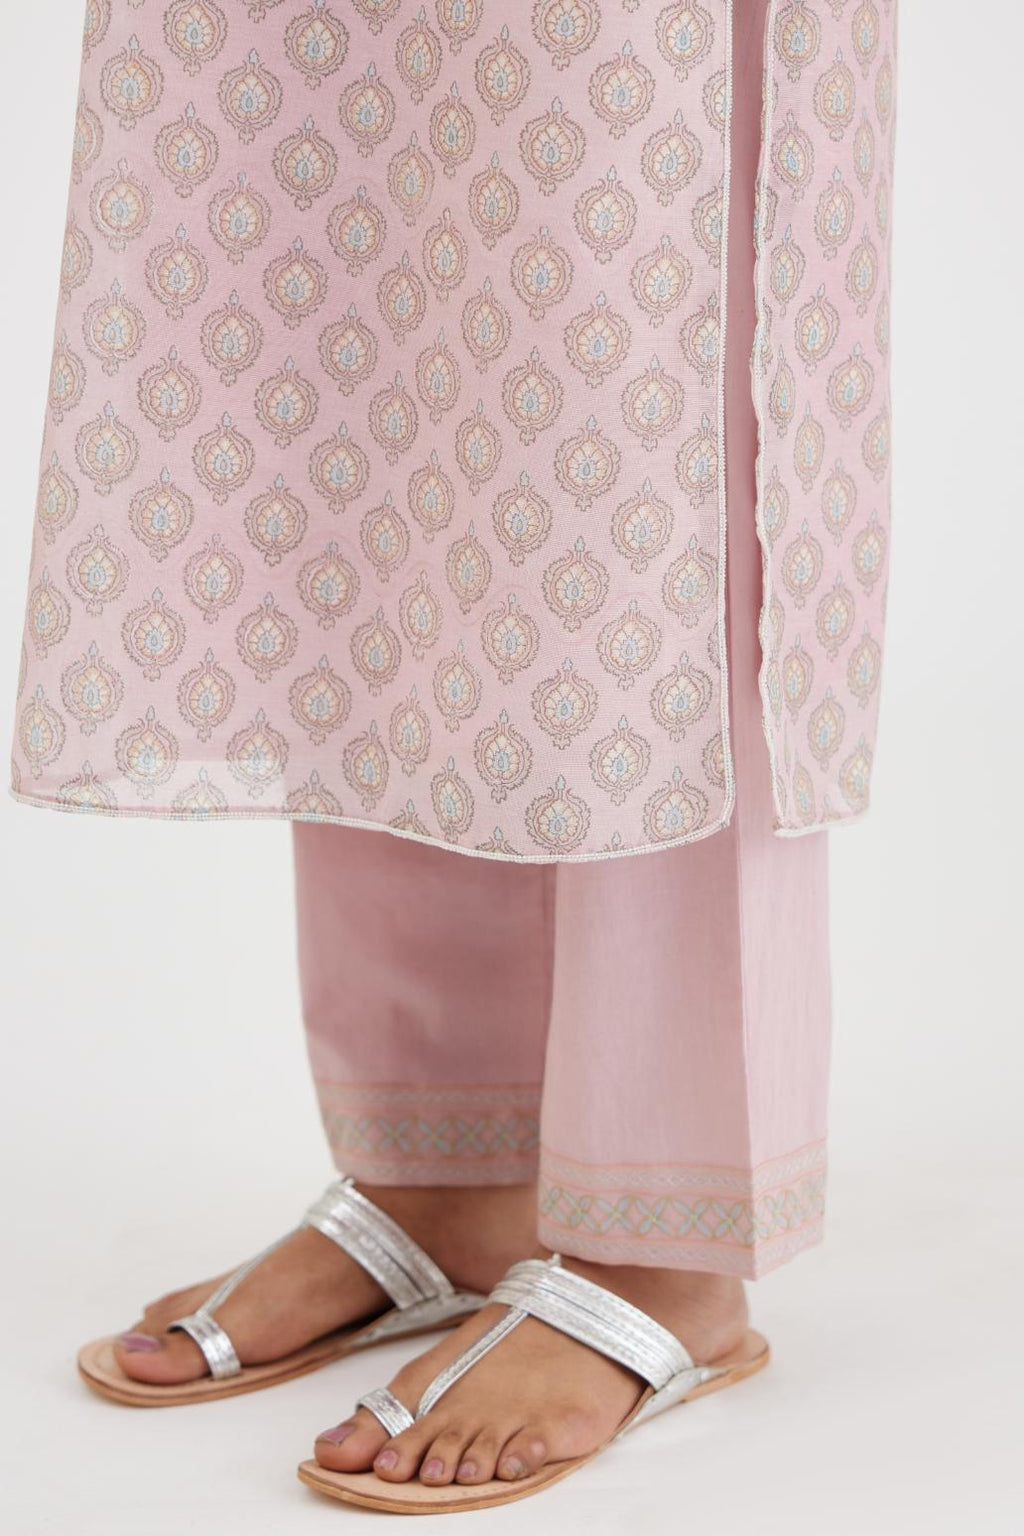 Pink silk chanderi straight kurta set with all-over hand block print and silver bugle beads detailing.